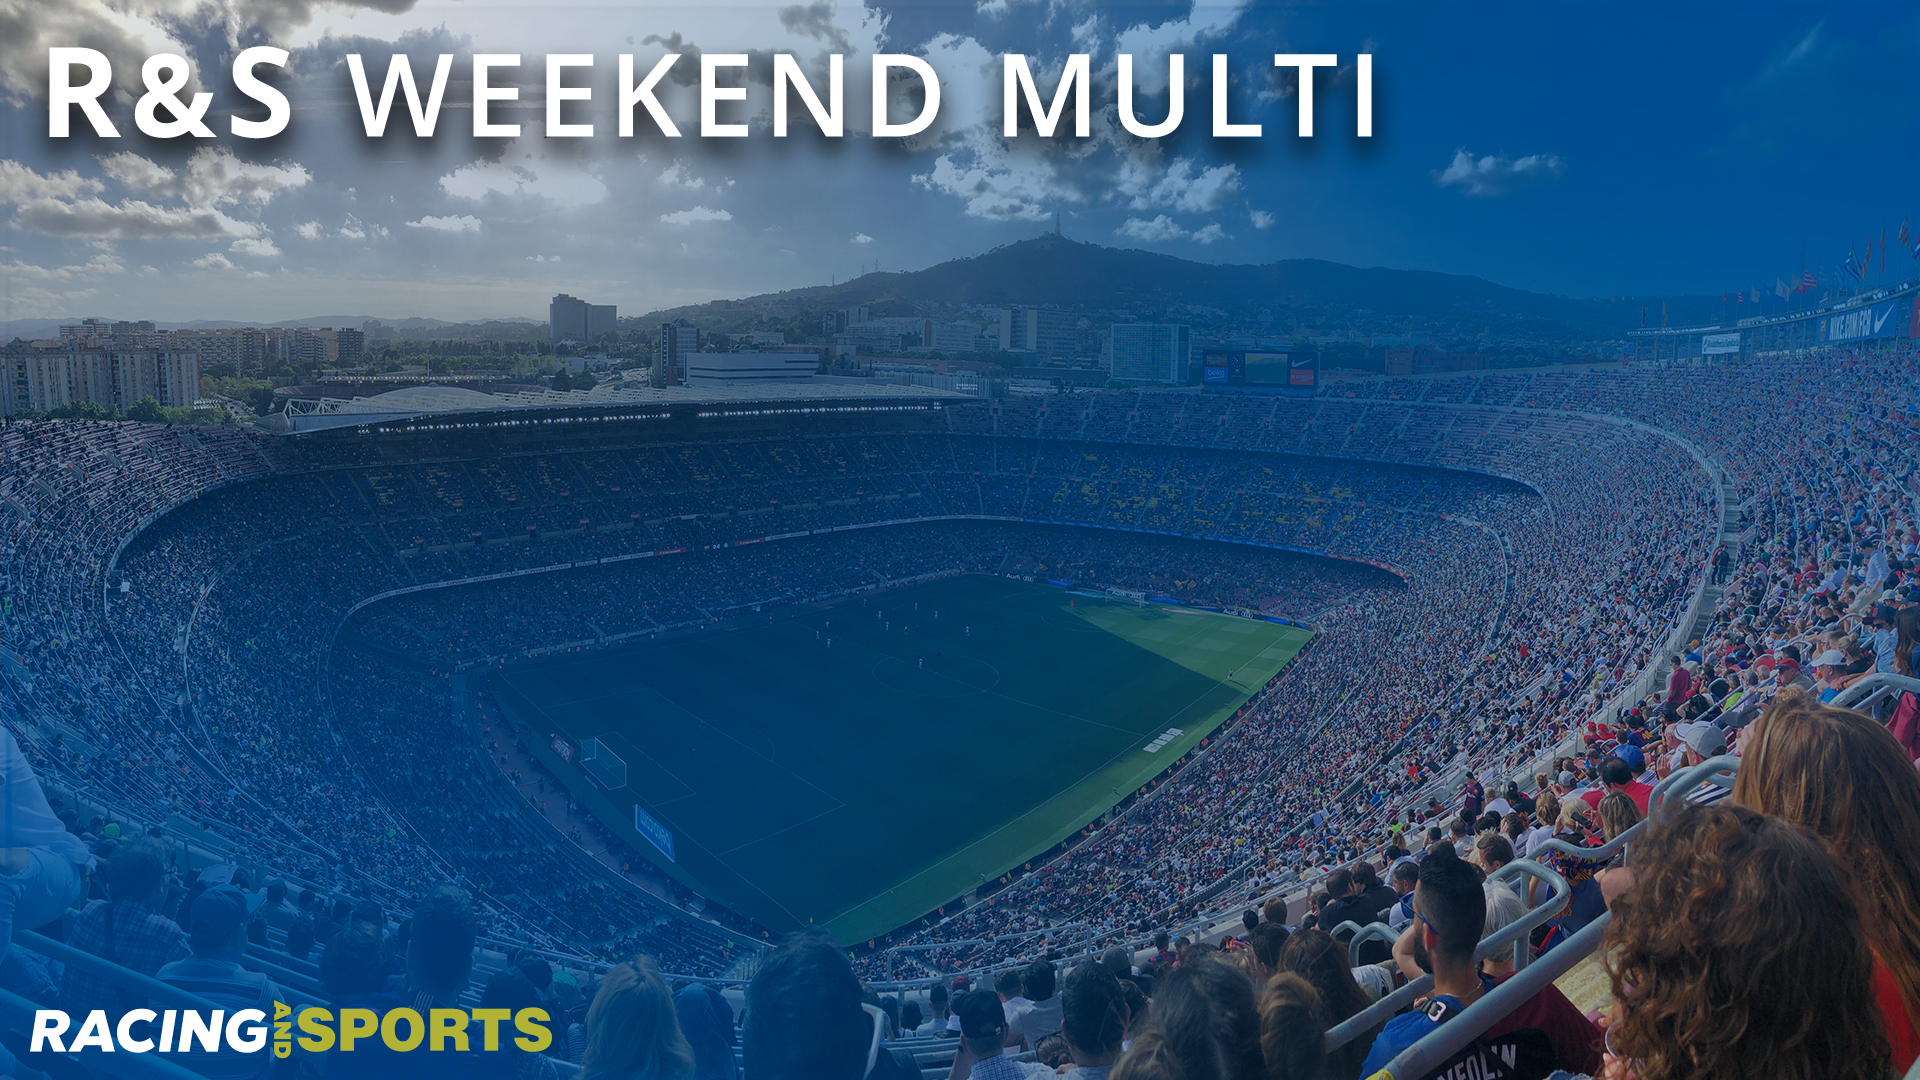 Sam Williams has delivered another knockout Weekend Multi.